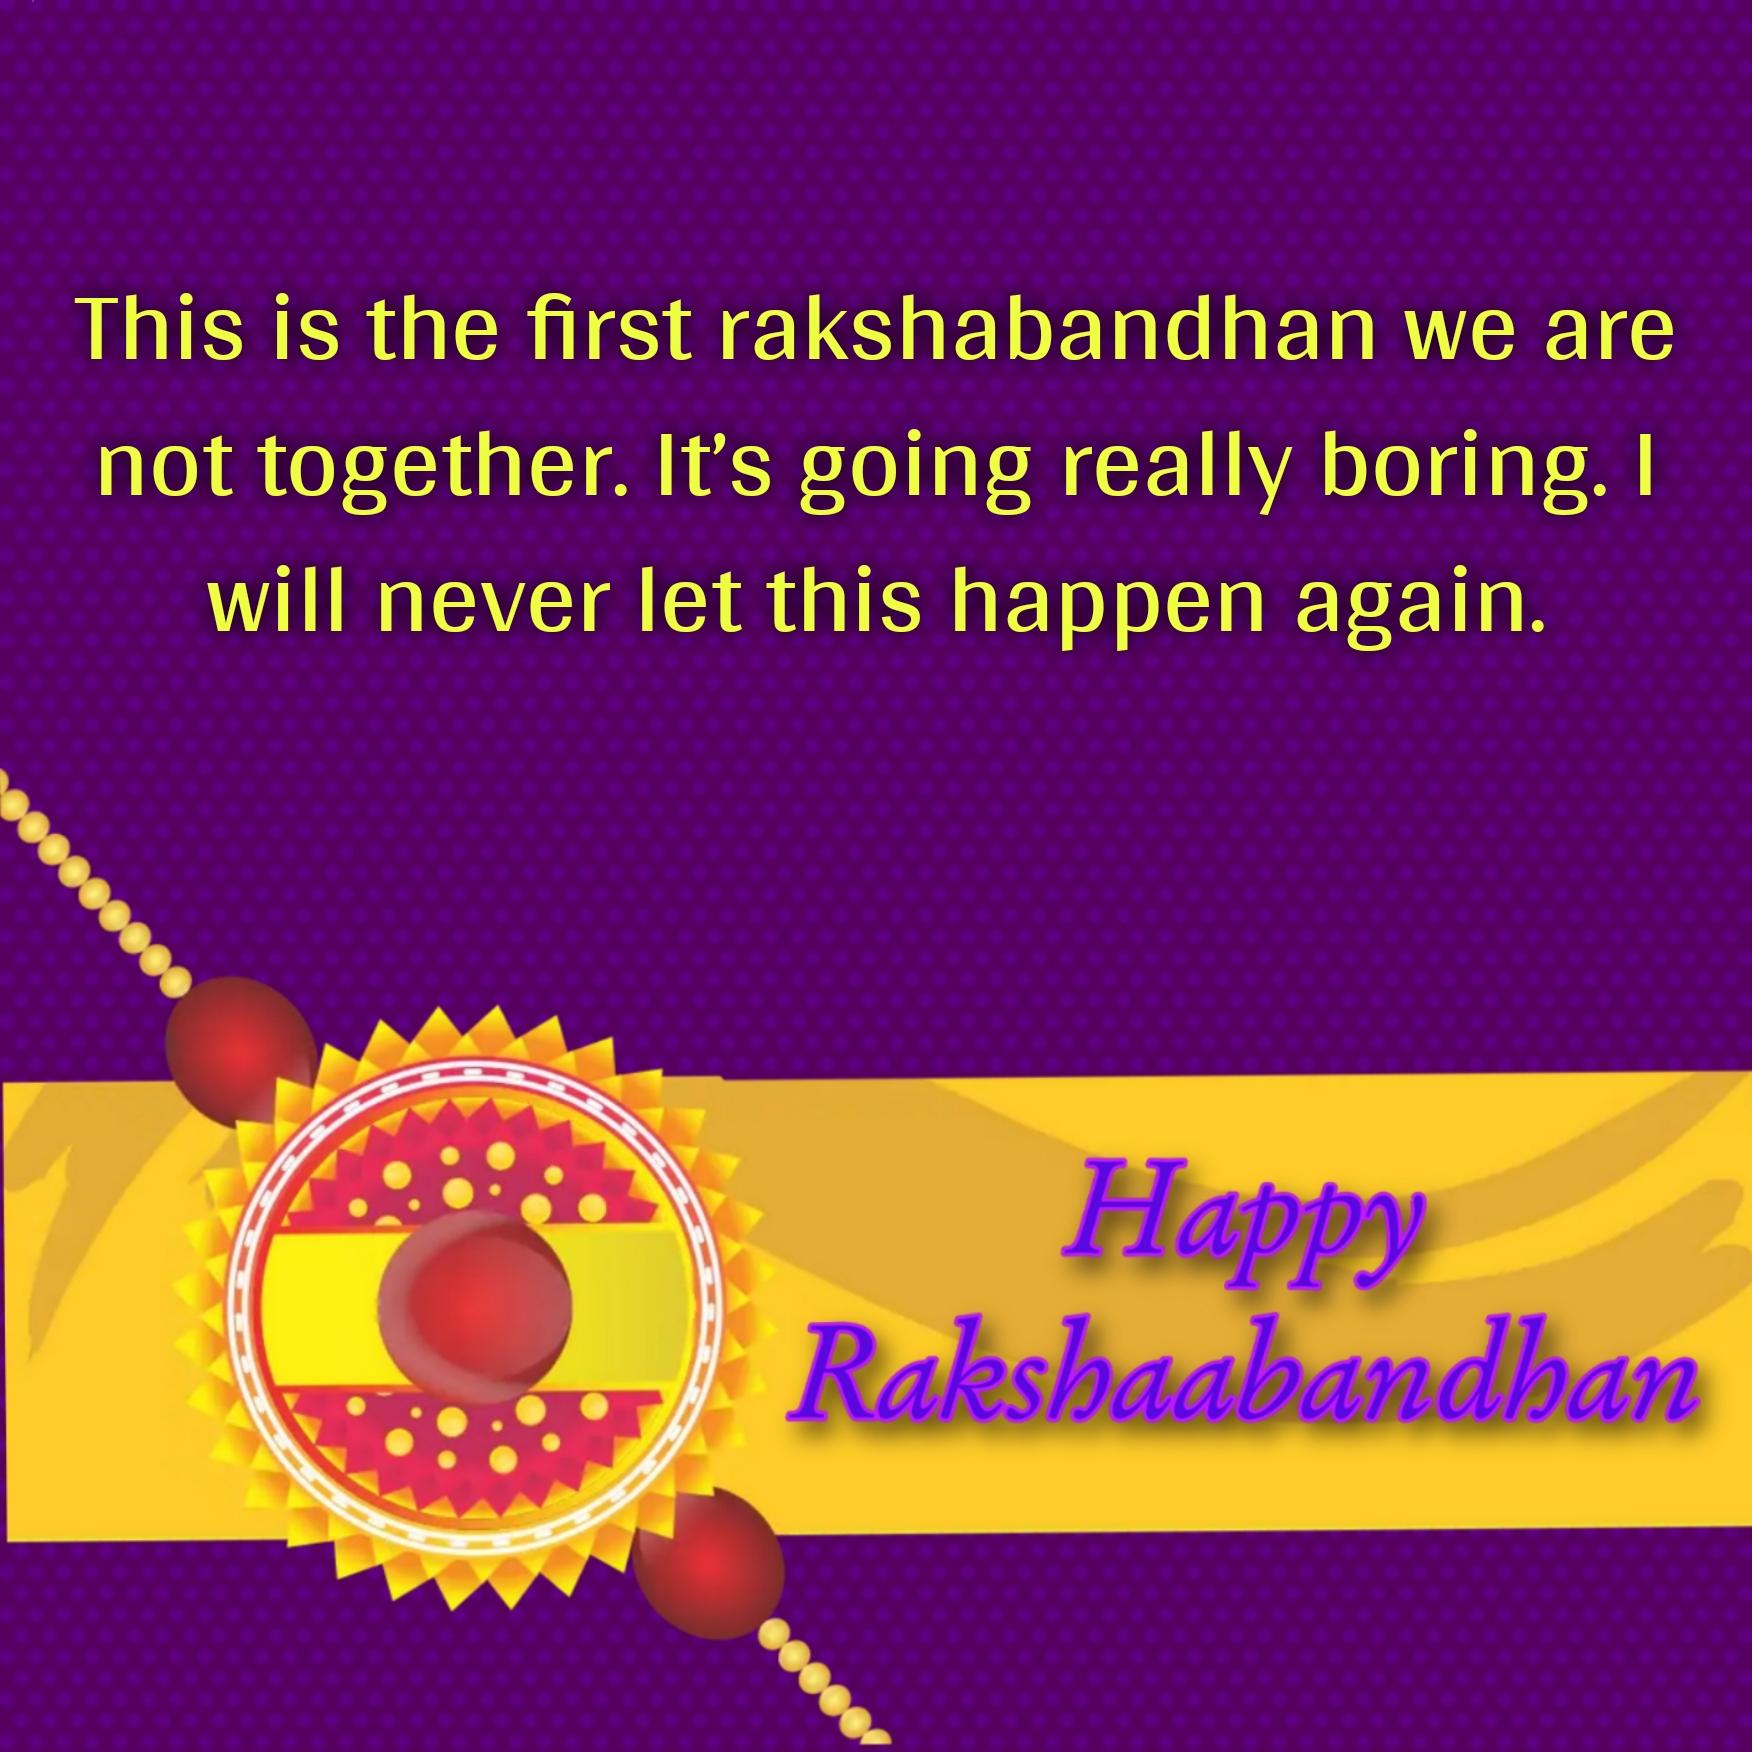 This is the first rakshabandhan we are not together